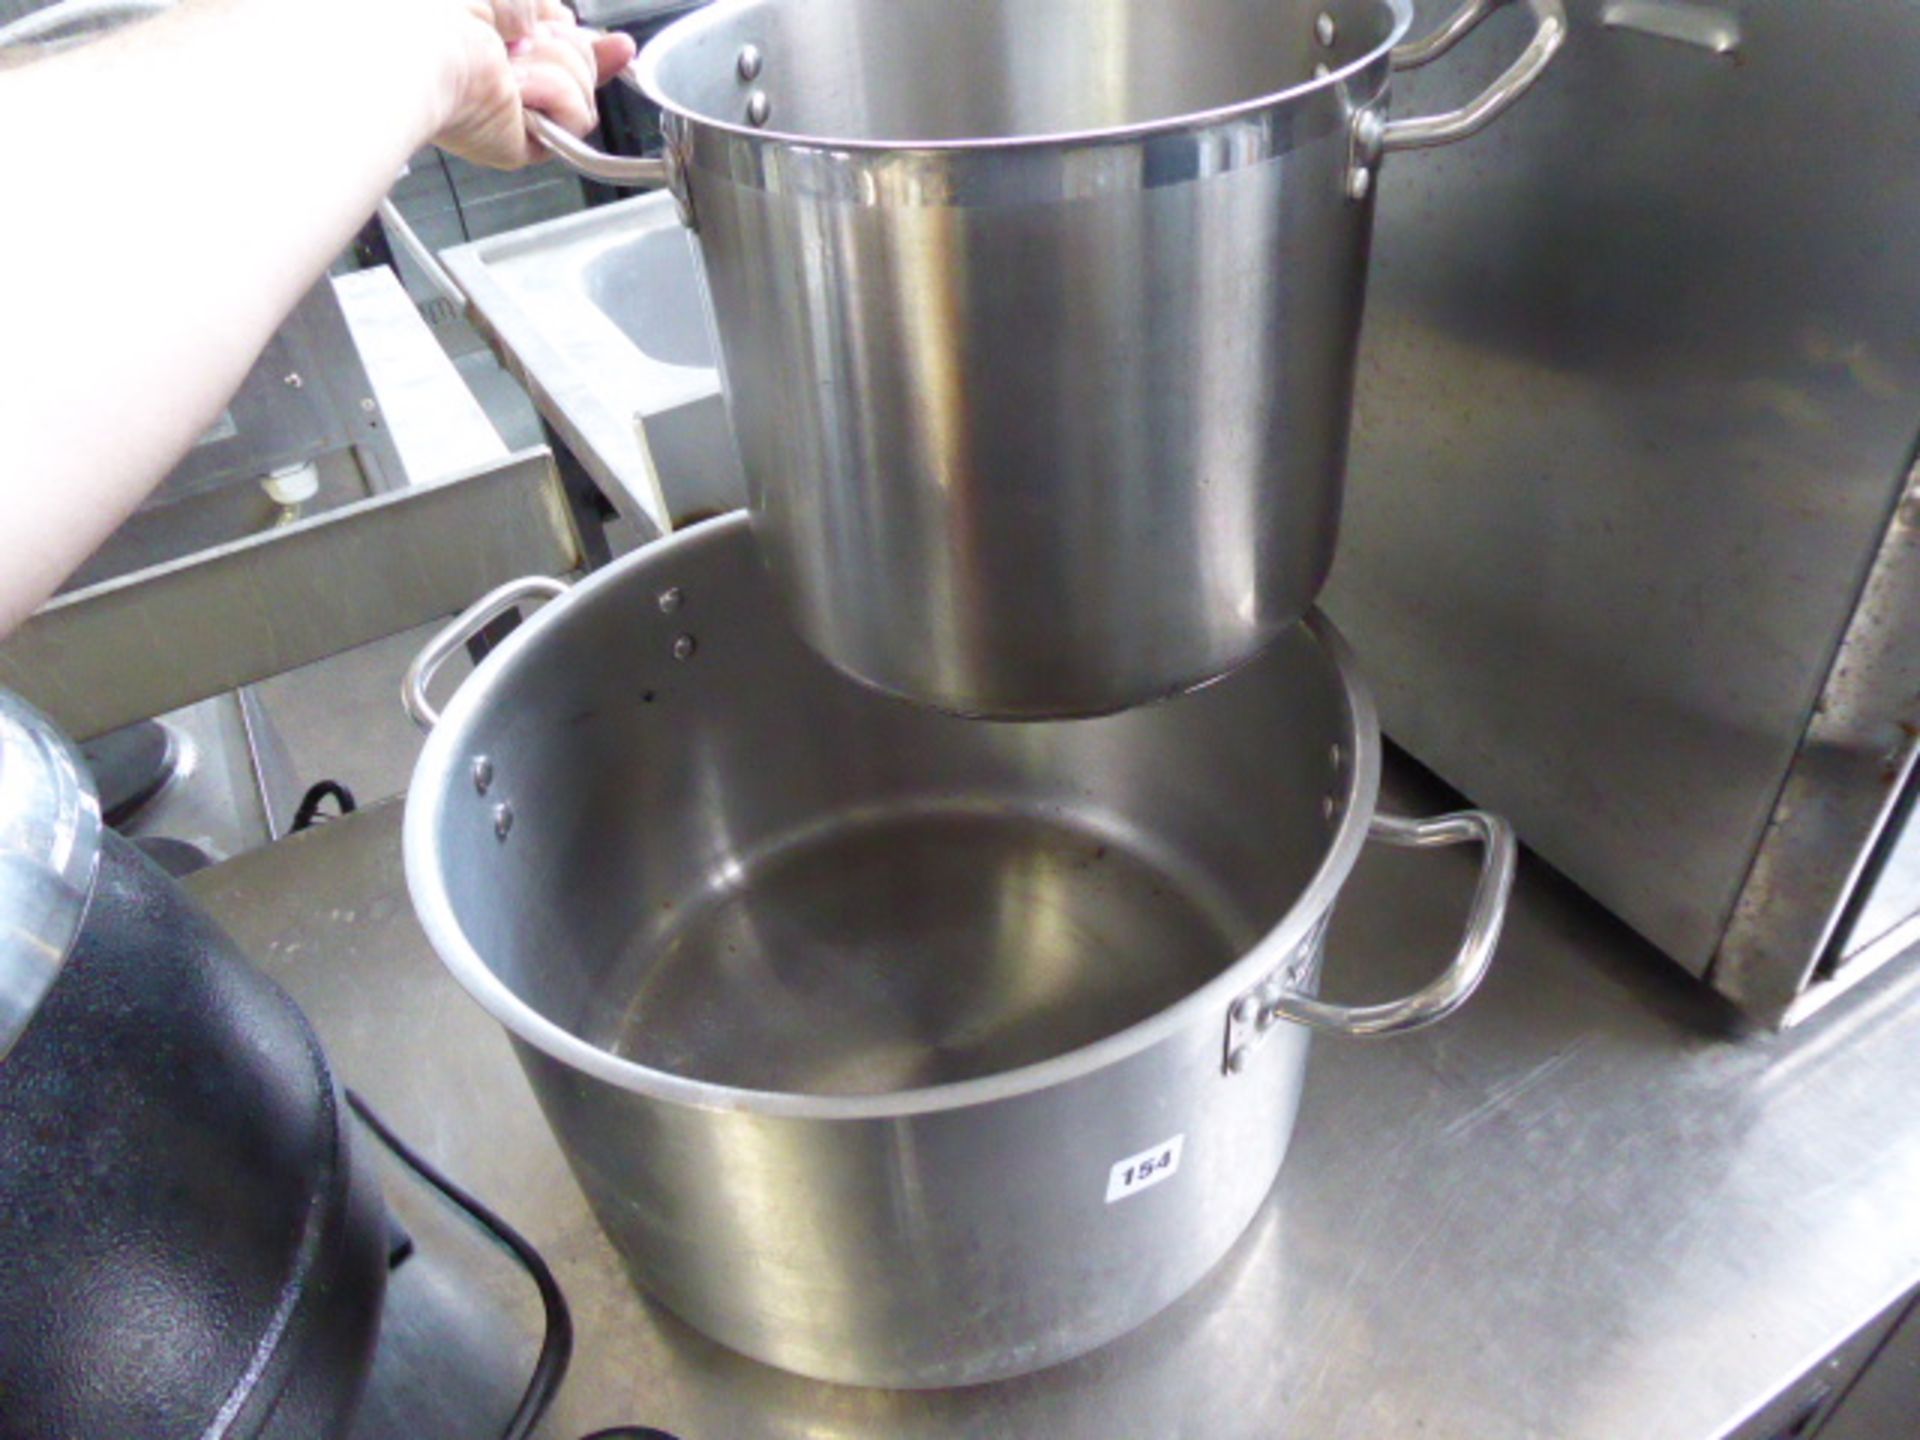 2 large saucepans with 2 handles